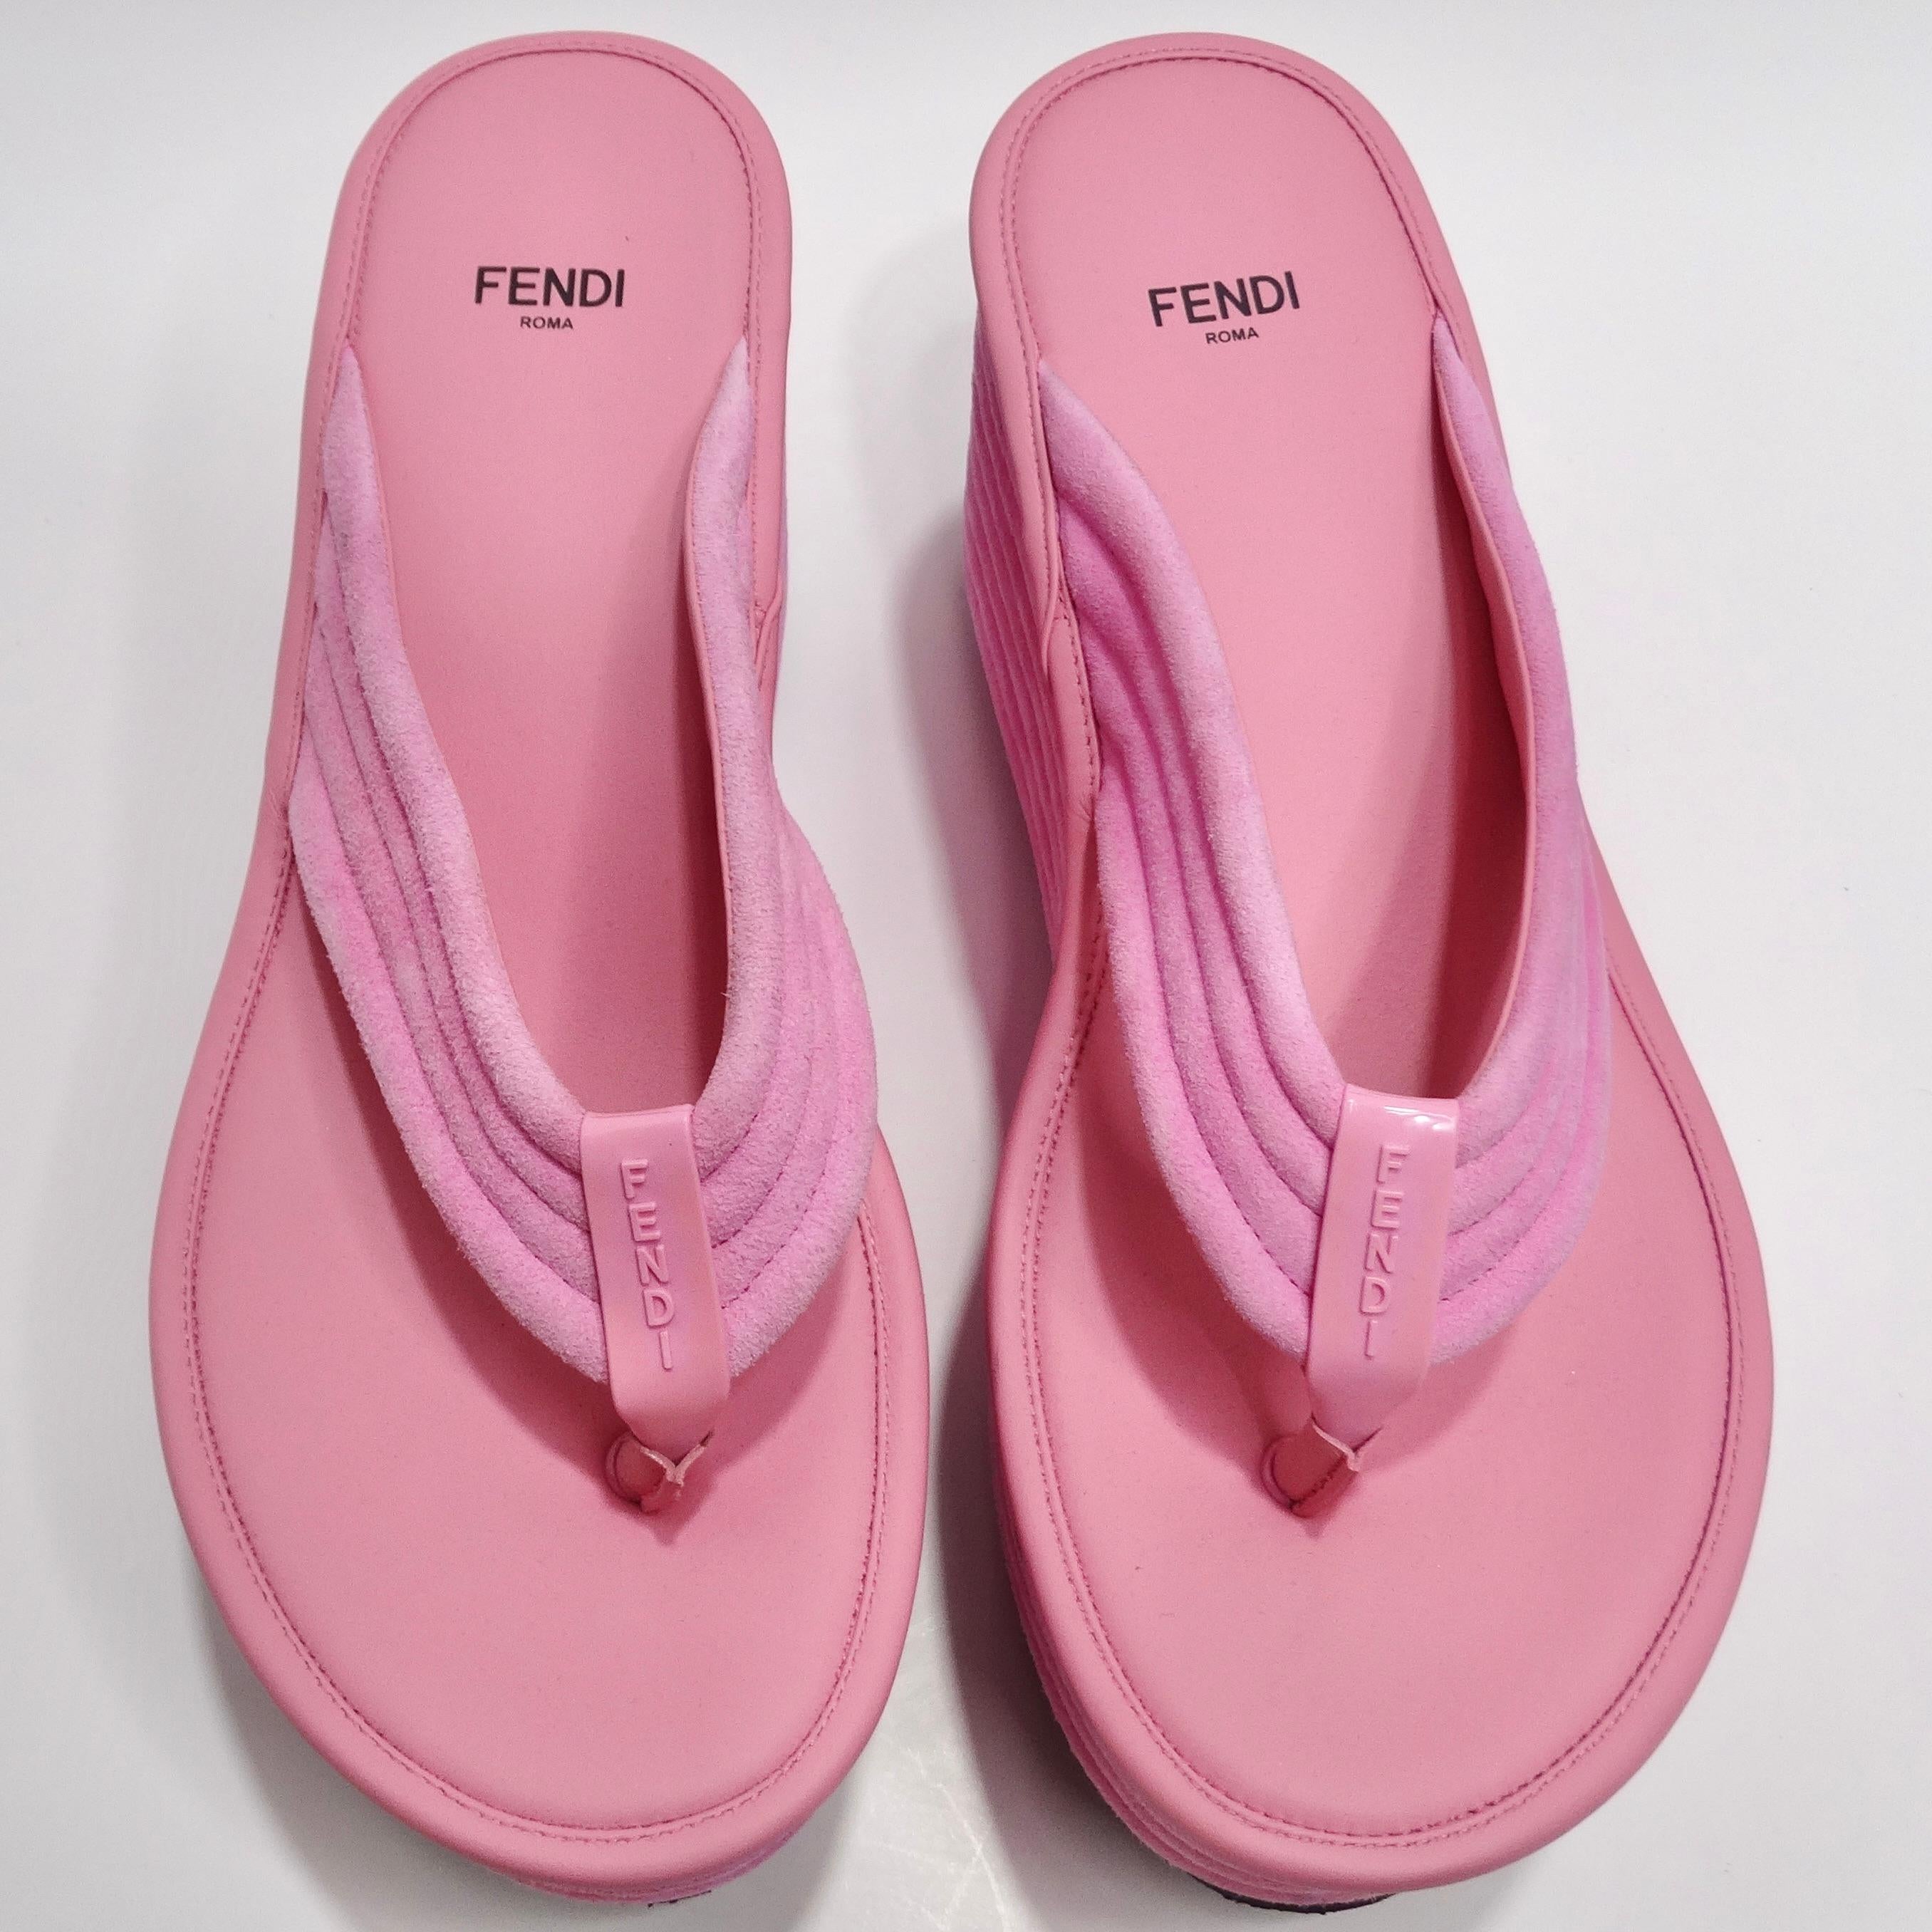 Elevate your summer style with the Fendi Pink Suede Platform Flip Flops. These jumbo platform flip flops are designed to make a statement, combining bold design elements with luxurious materials.

Crafted from vibrant pink suede, these flip flops